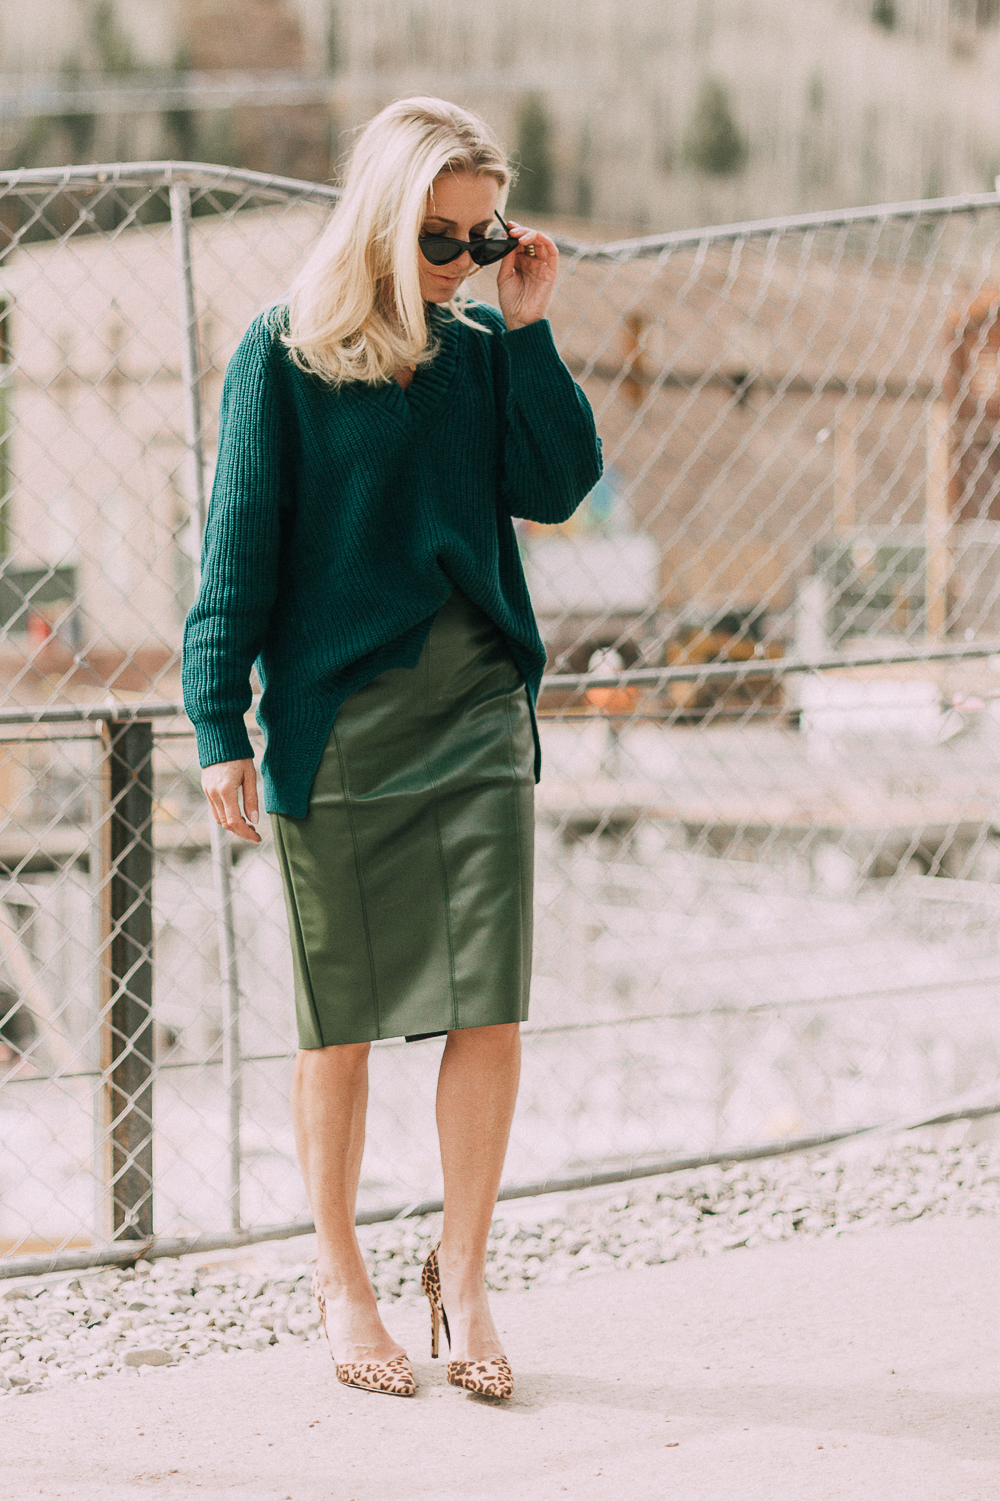 Work Outfit Ideas, what to wear to work, outfit ideas that are modern and unexpected from Express, featuring a faux leather green pencil skirt, and chunky knit tunic sweater in green, and leopard print pumps on blonde woman